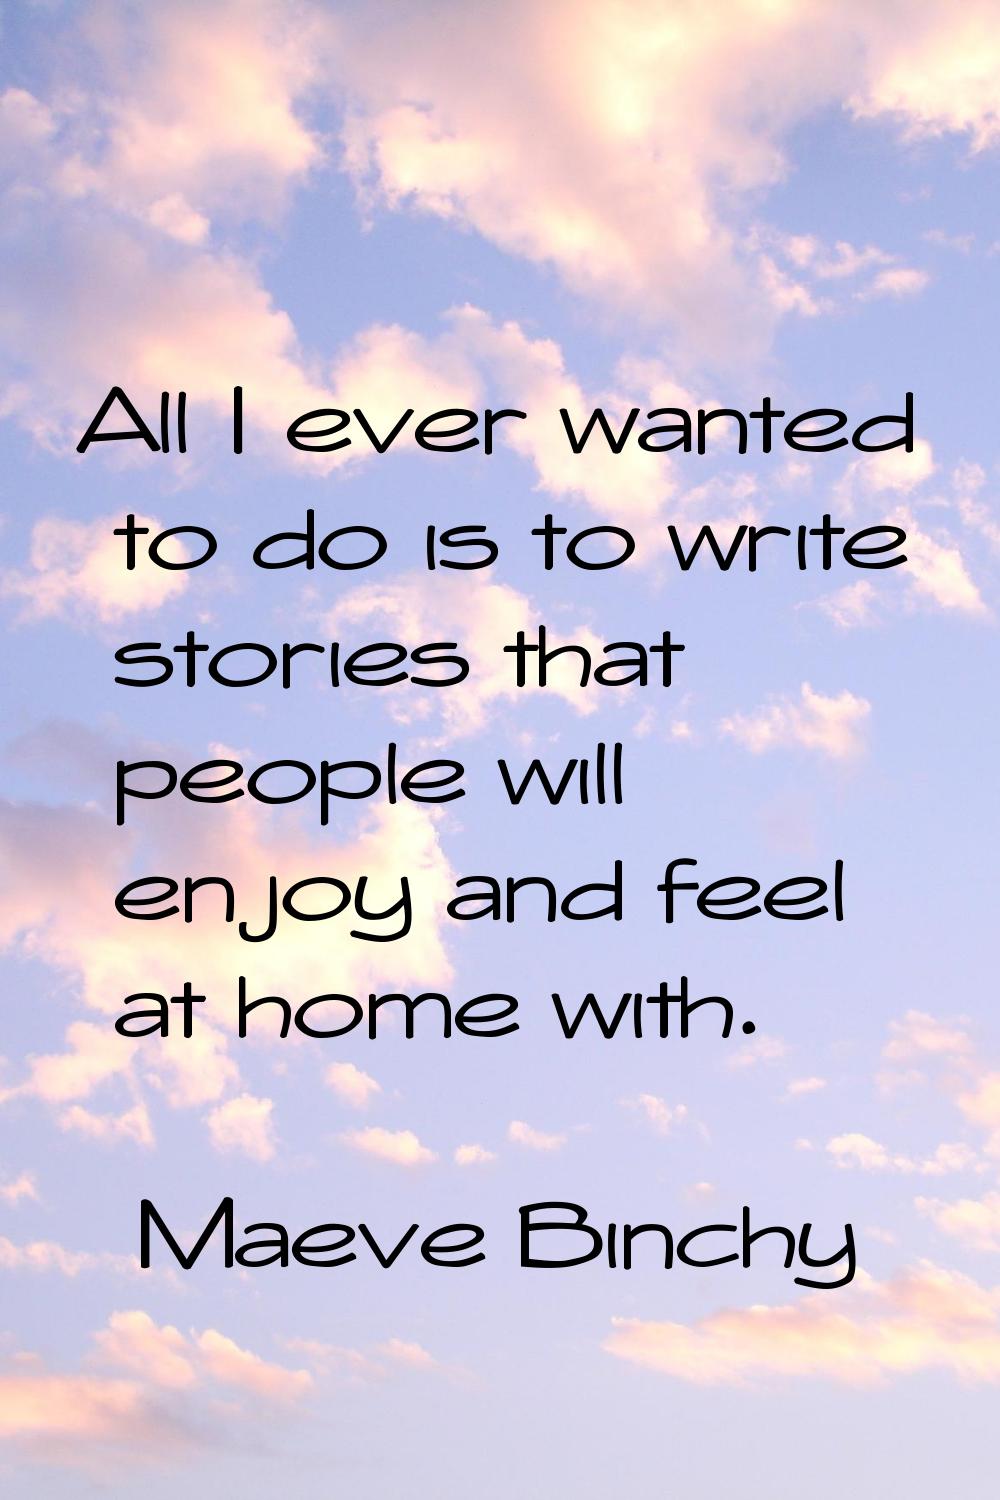 All I ever wanted to do is to write stories that people will enjoy and feel at home with.